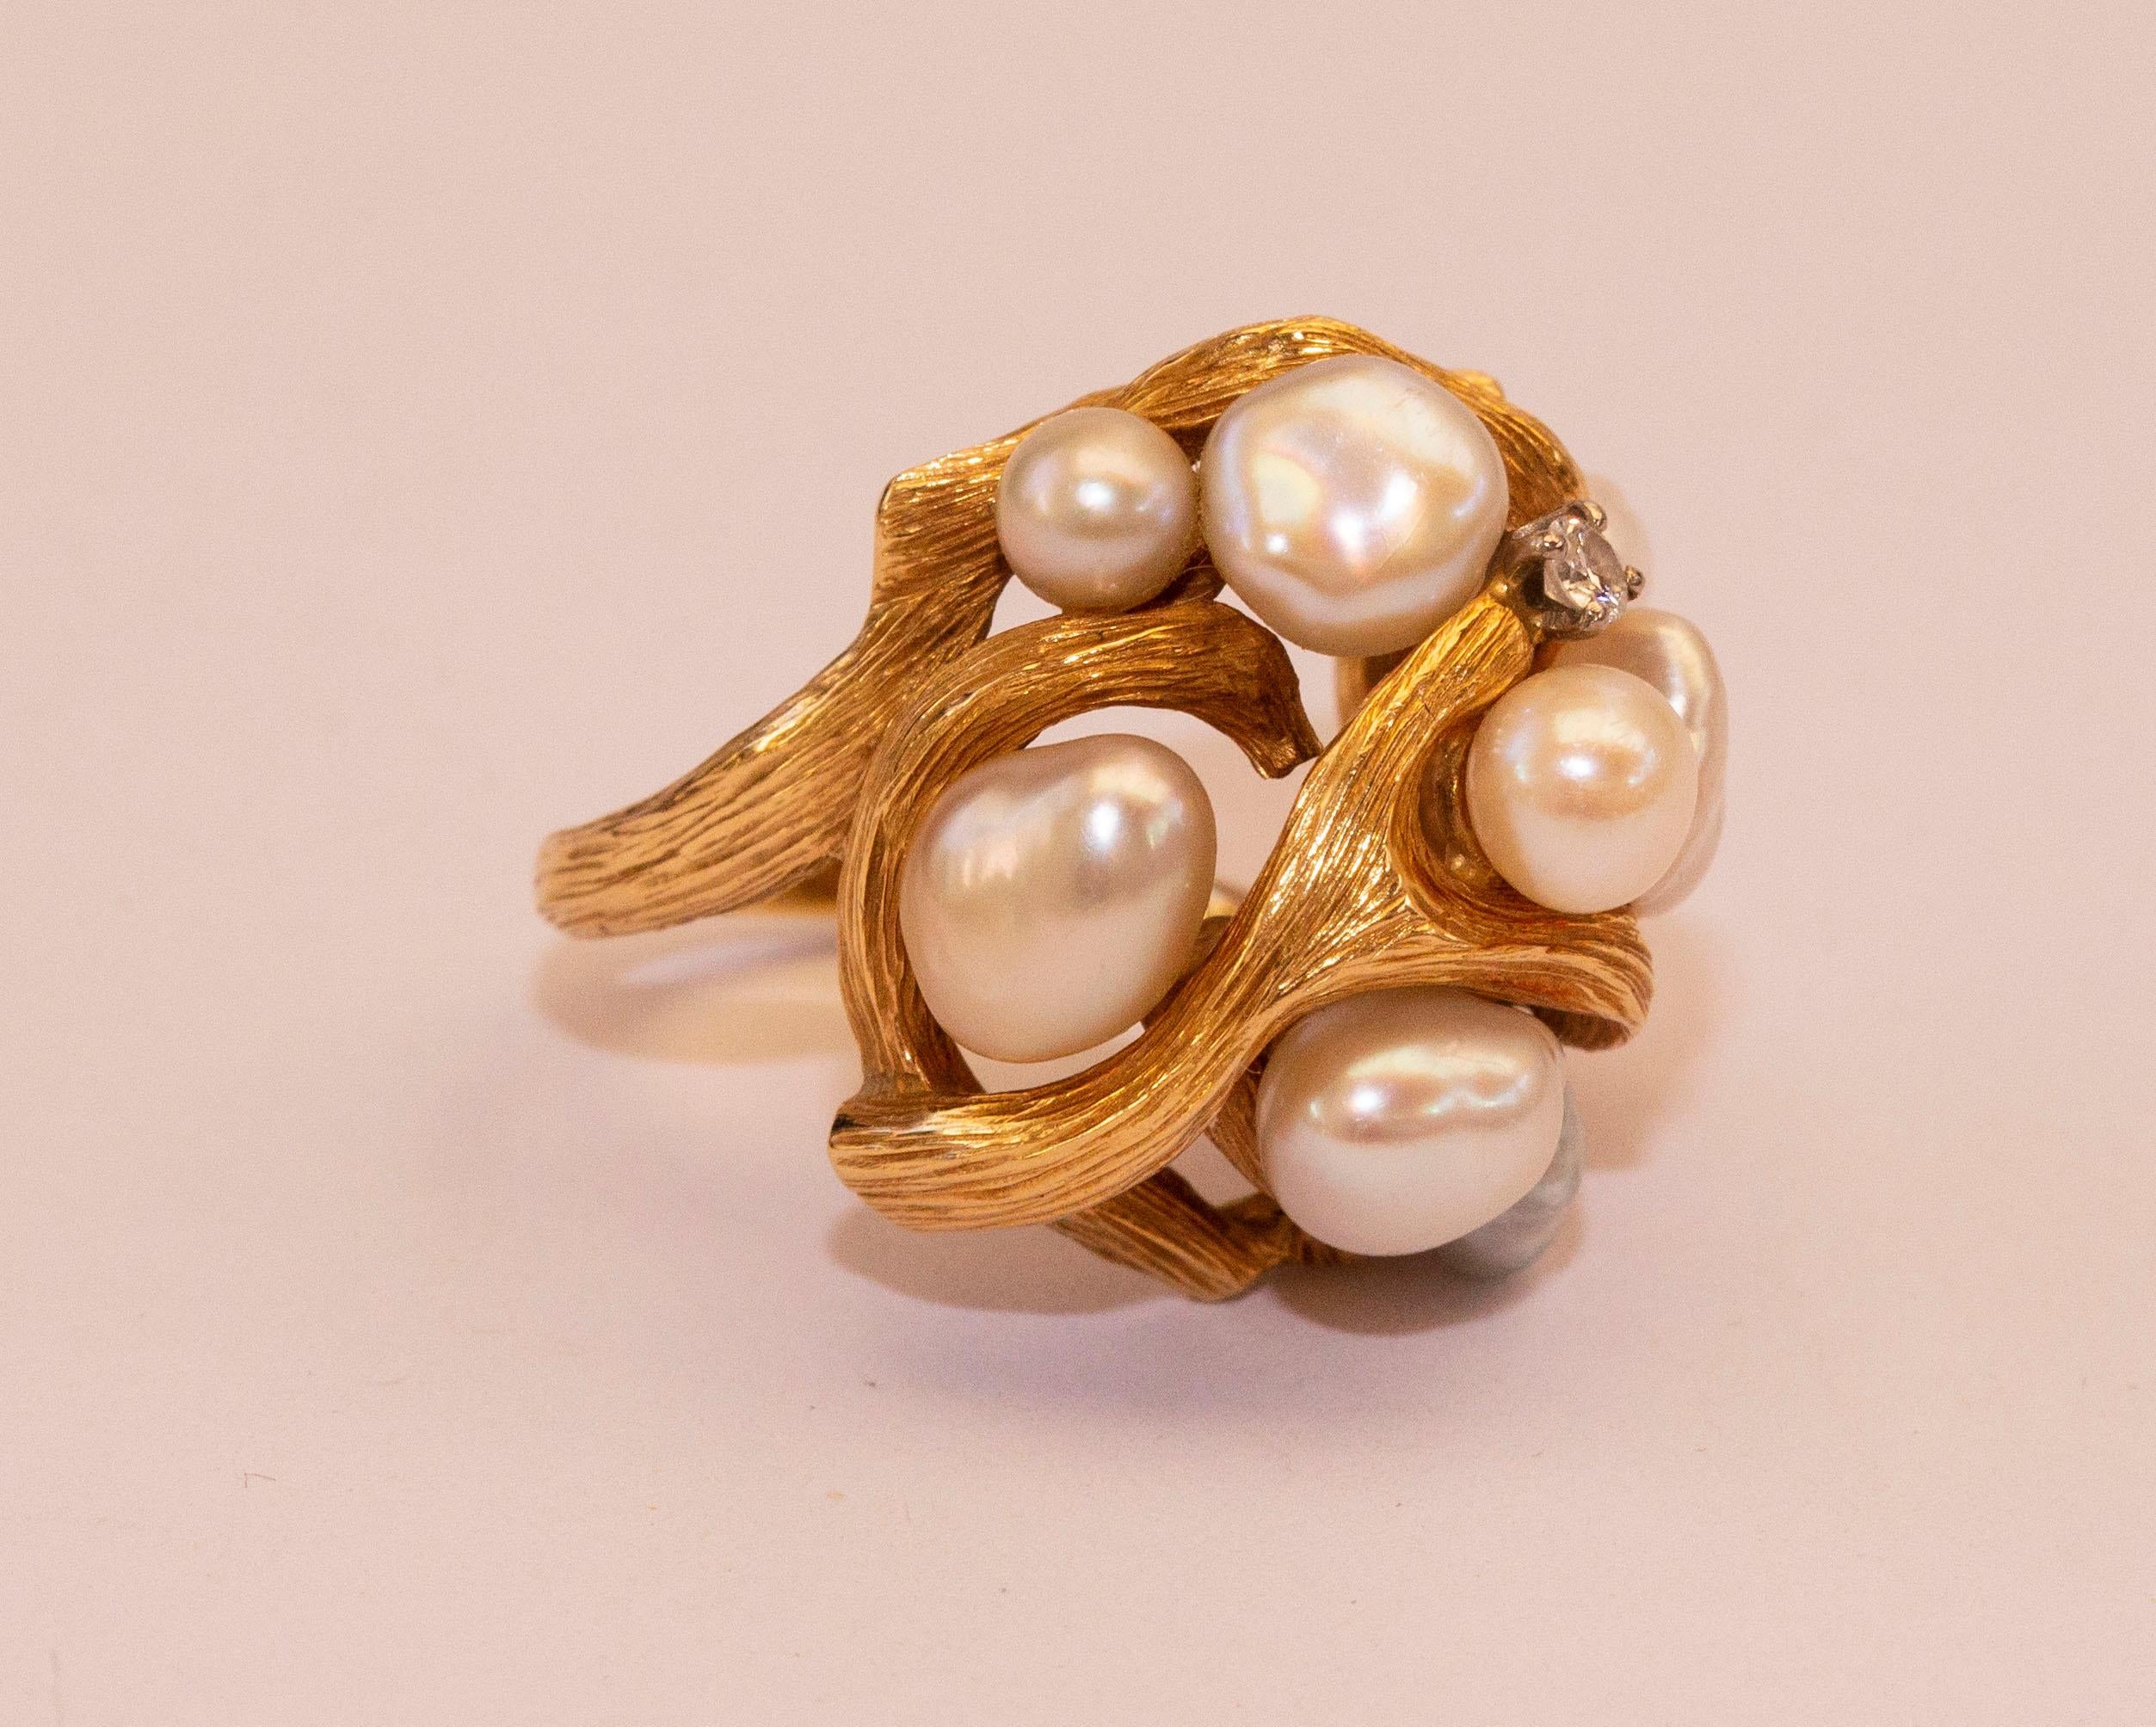 18 Karat Yellow Gold Brutalist Organic Cocktail Ring with Pearls and Diamond For Sale 3